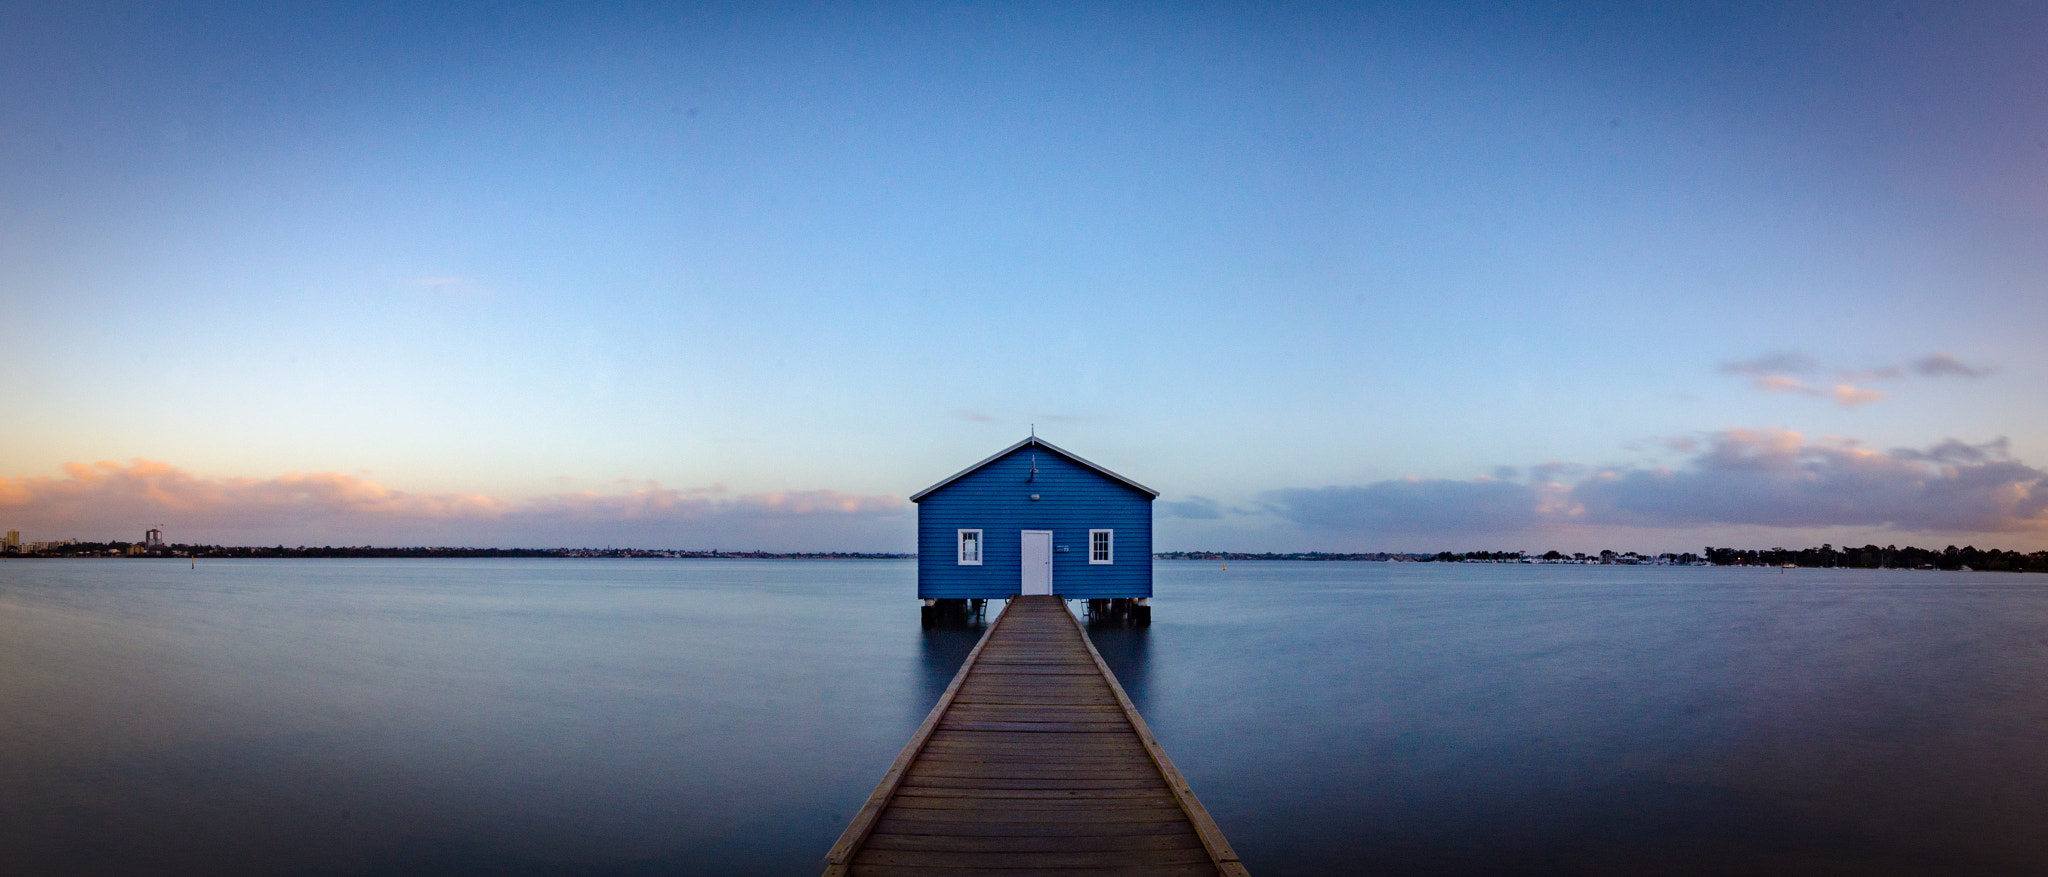 Nikon D5100 + Tokina AT-X 11-20 F2.8 PRO DX (AF 11-20mm f/2.8) sample photo. That boat house photography